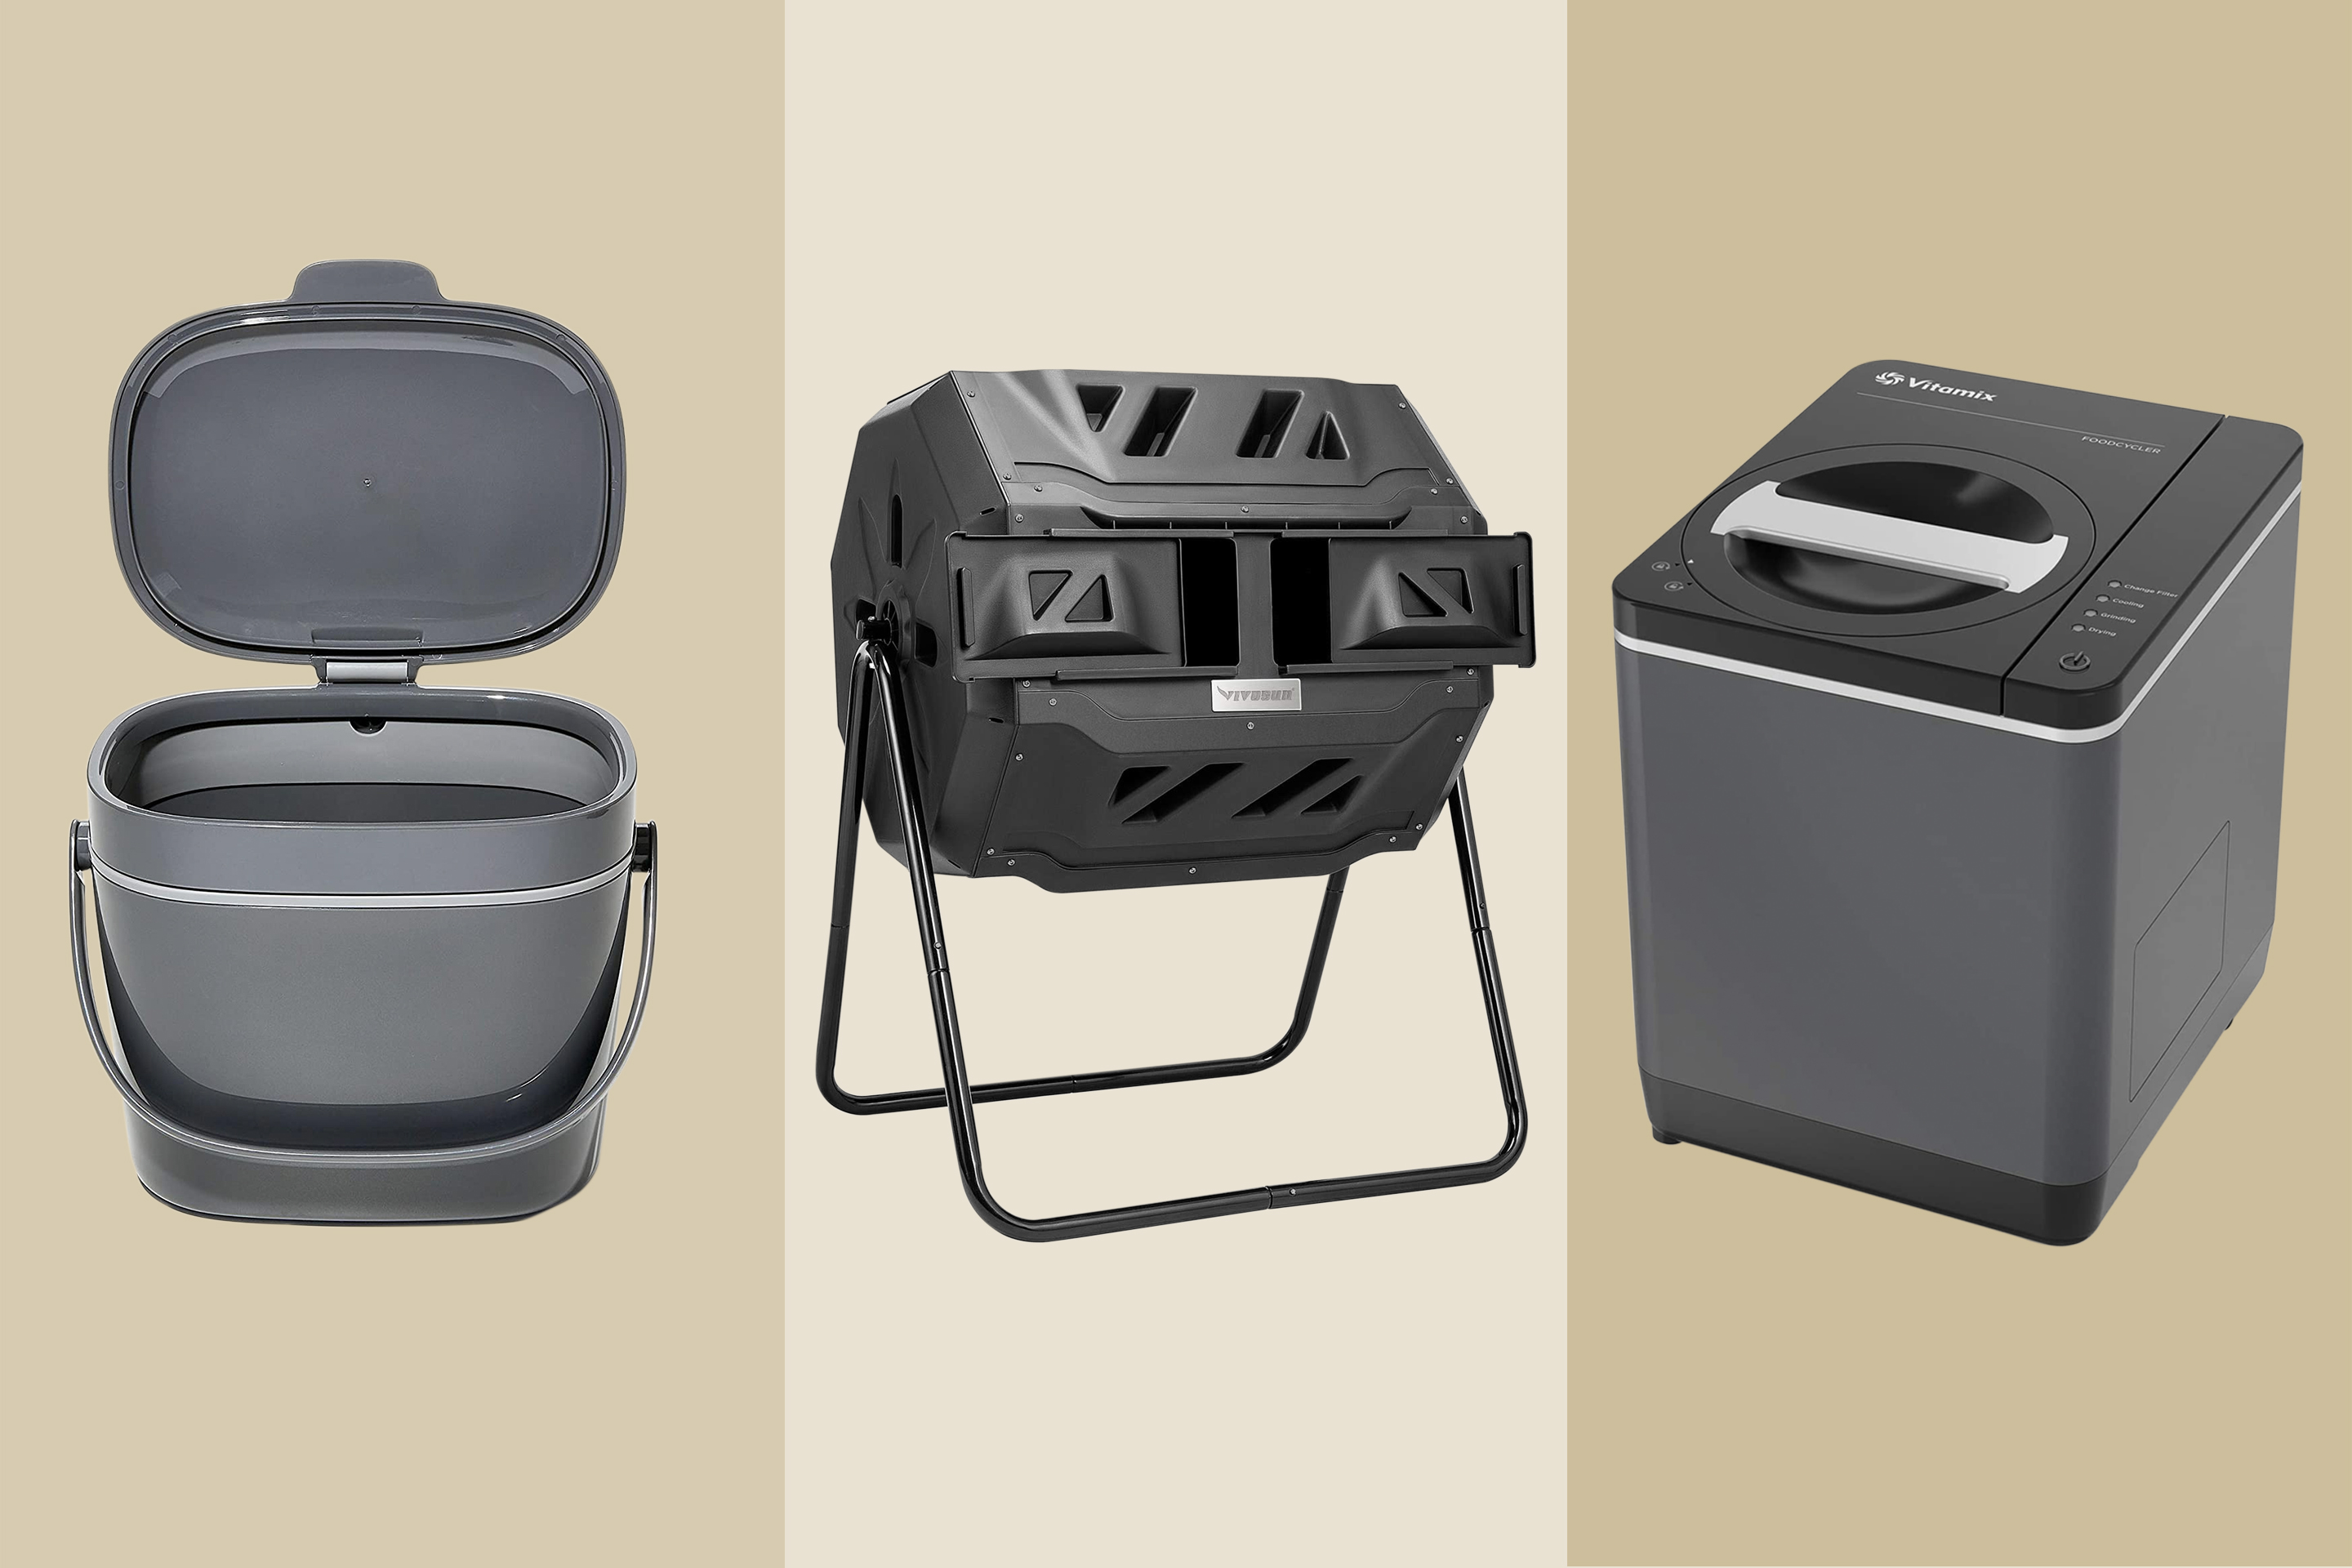 The Best Composters for Your Money